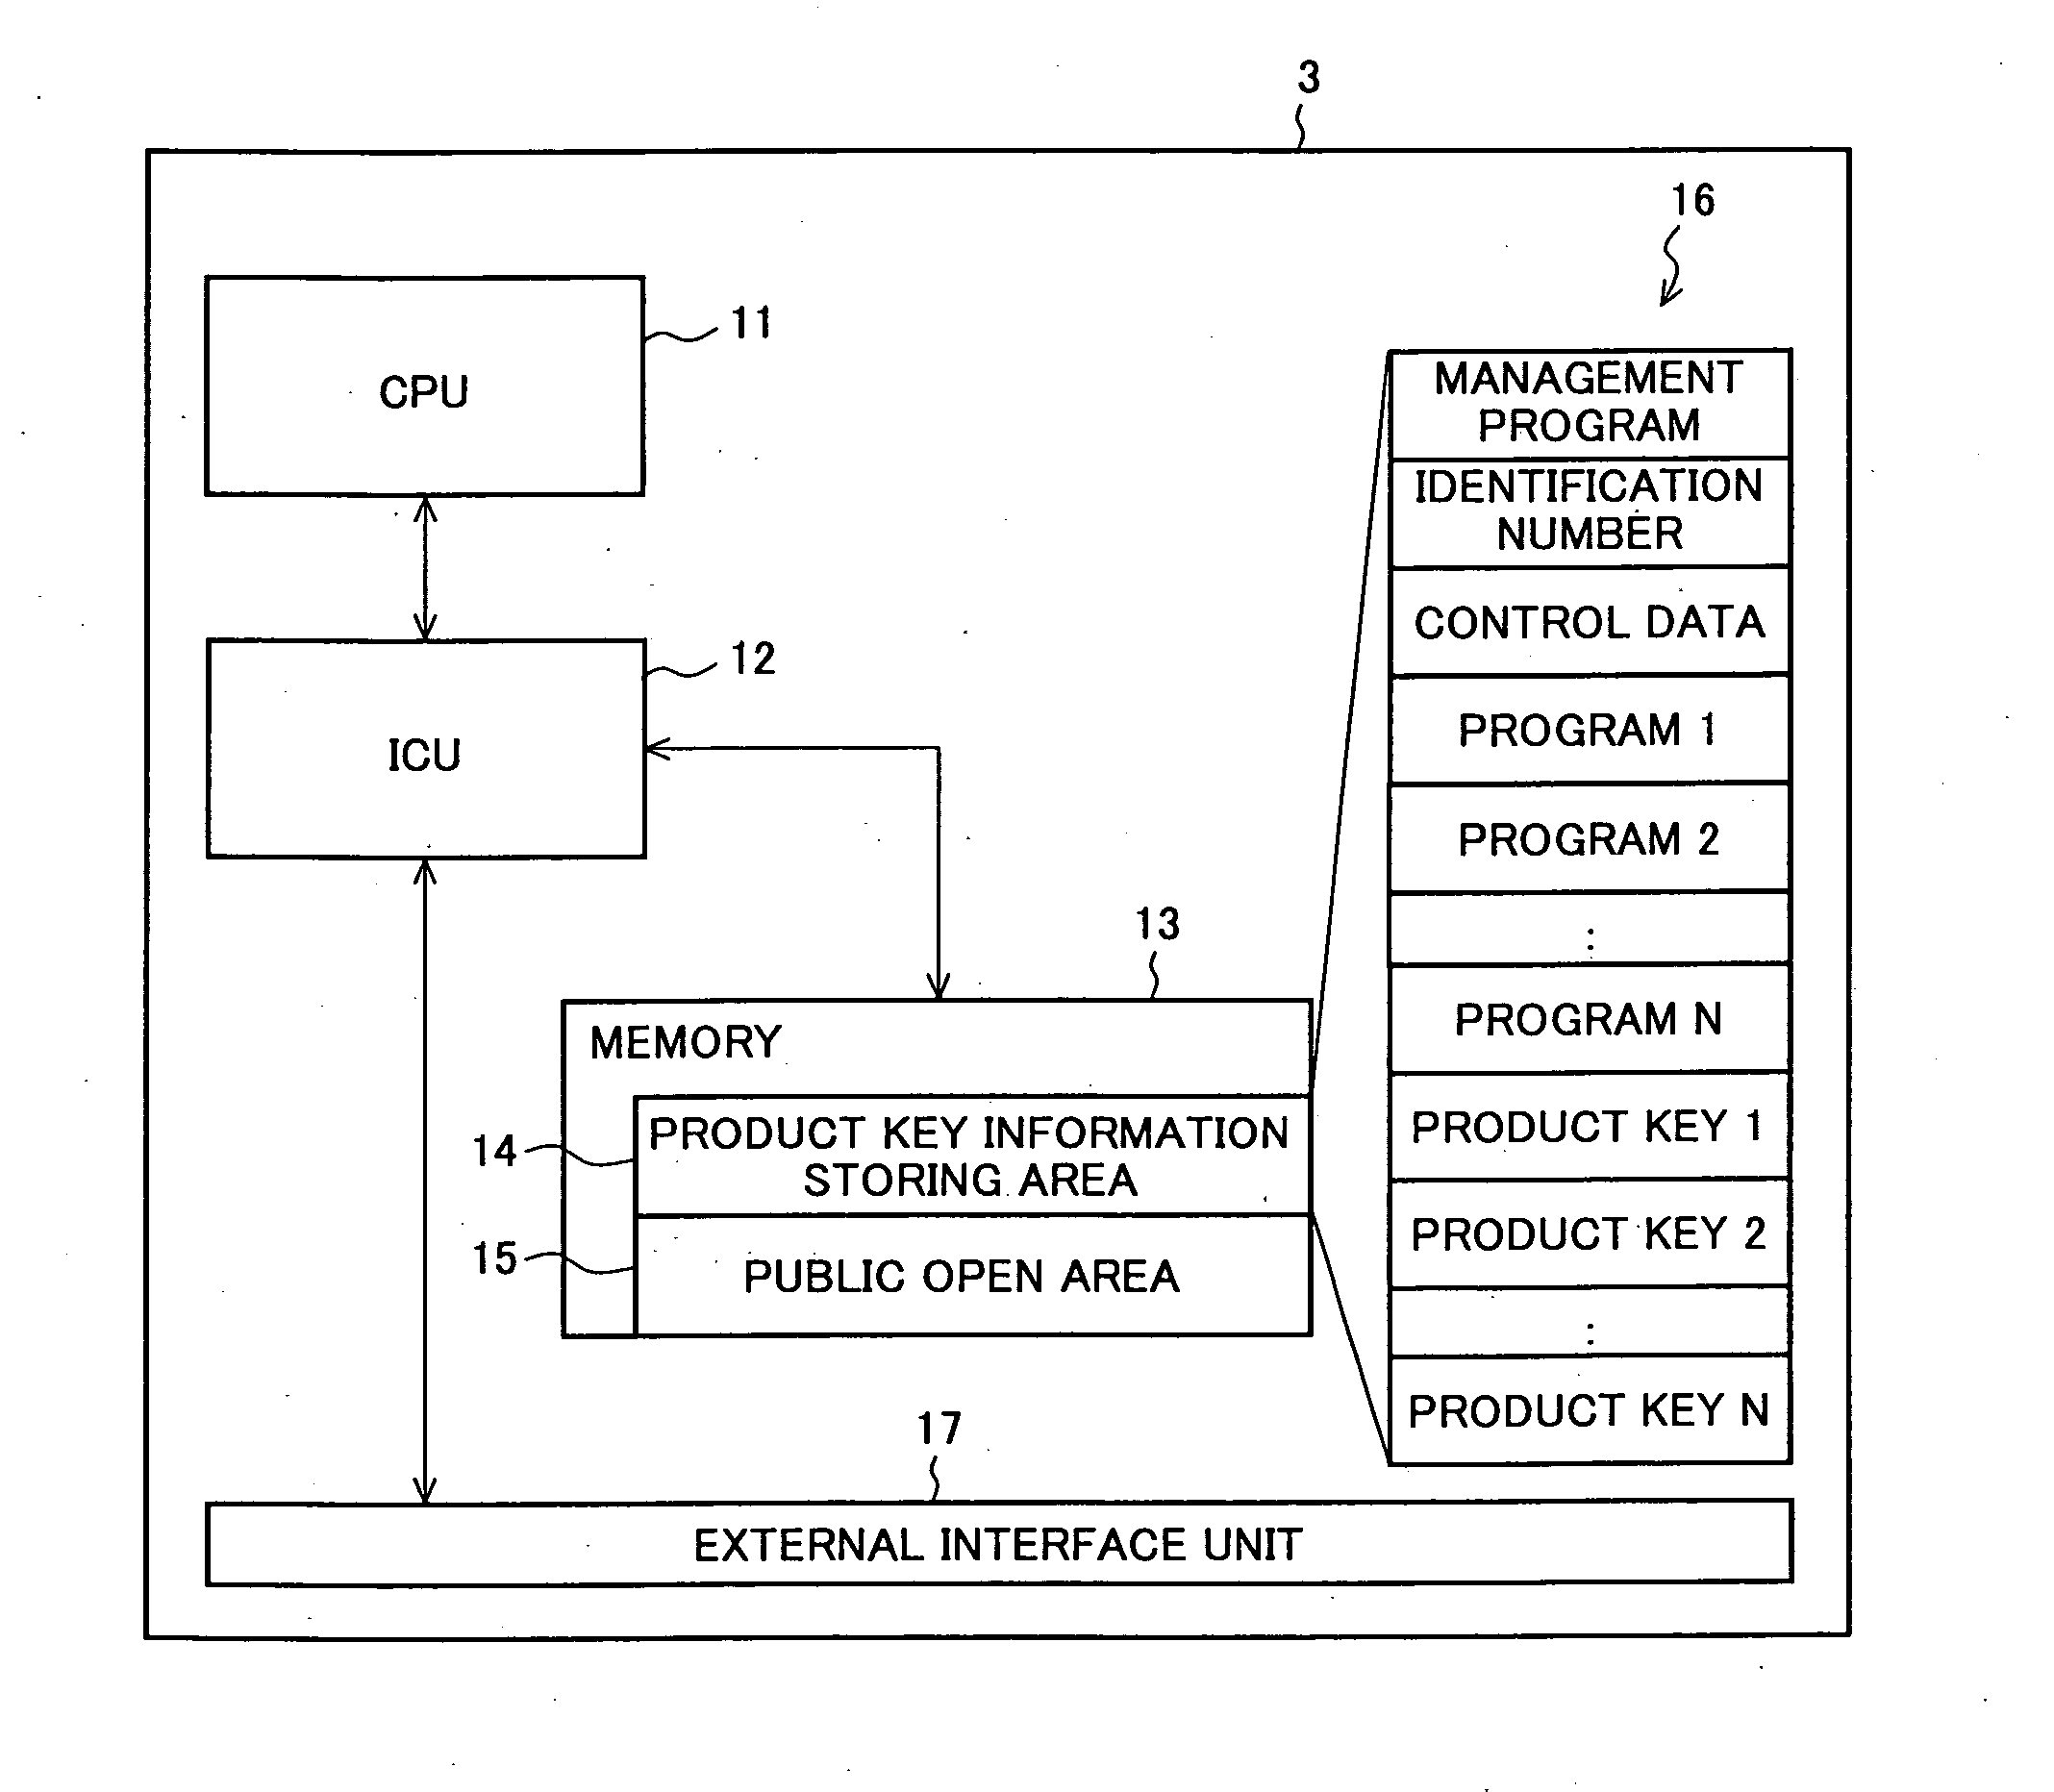 Information processing apparatus, information storing device, system for extending functions of information processing apparatus, method for extending functions of information processing apparatus, method for deleting functions thereof, and program for extending functions of information processing apparatus and program for deleting functions thereof